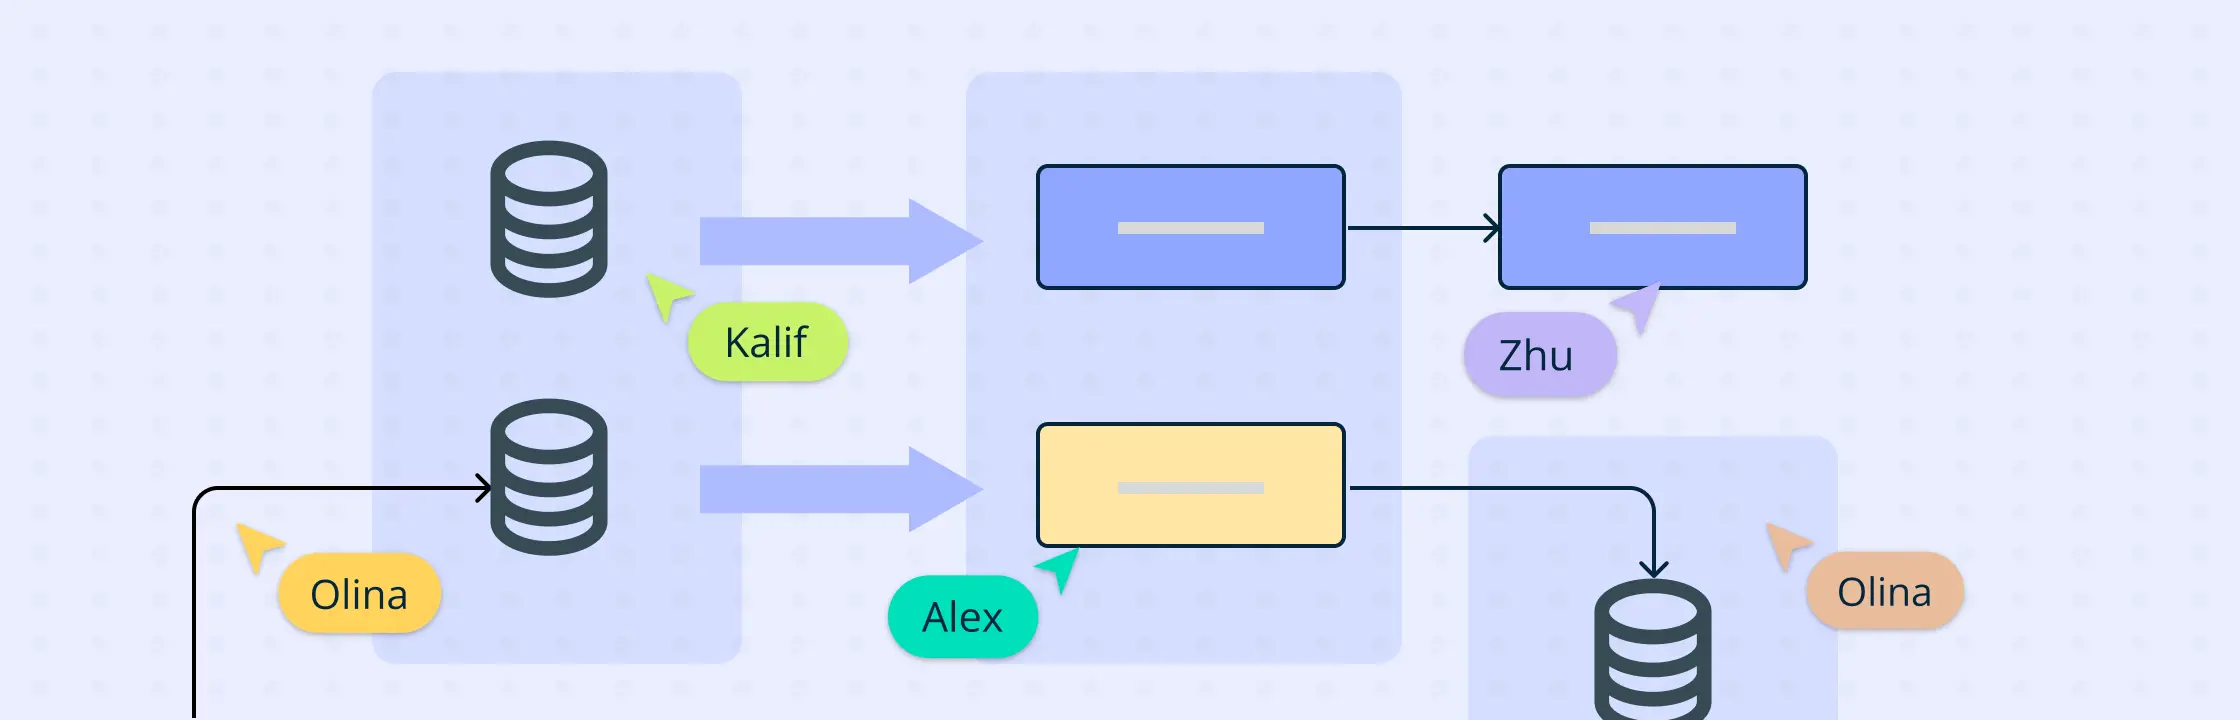 Understanding Data Architecture Diagrams: A Comprehensive Guide